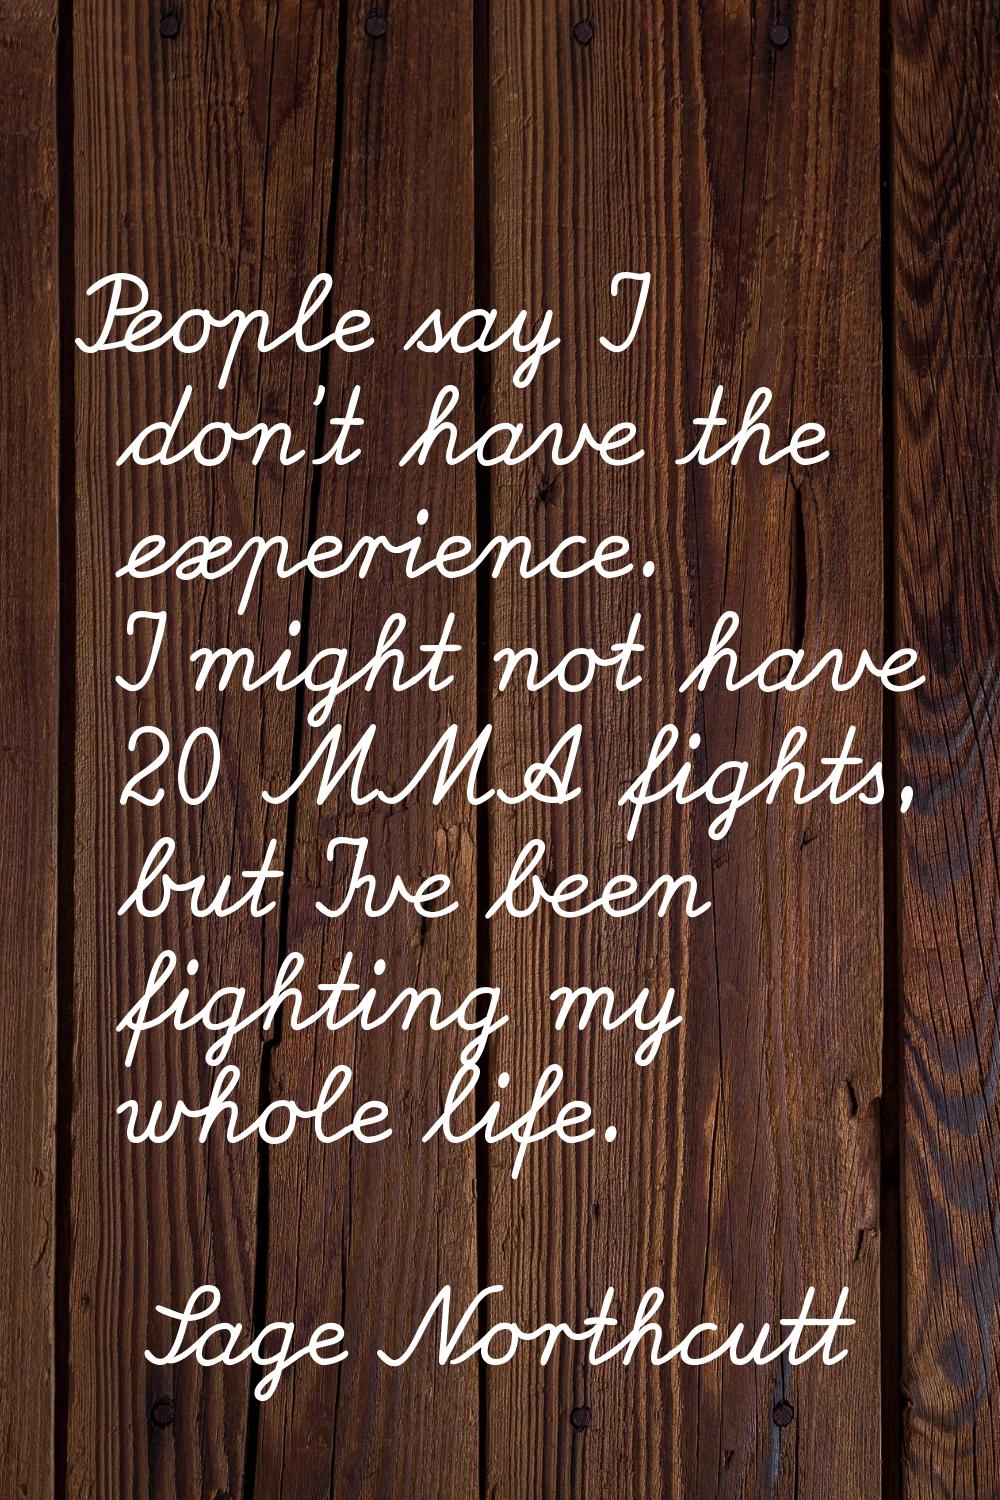 People say I don't have the experience. I might not have 20 MMA fights, but I've been fighting my w